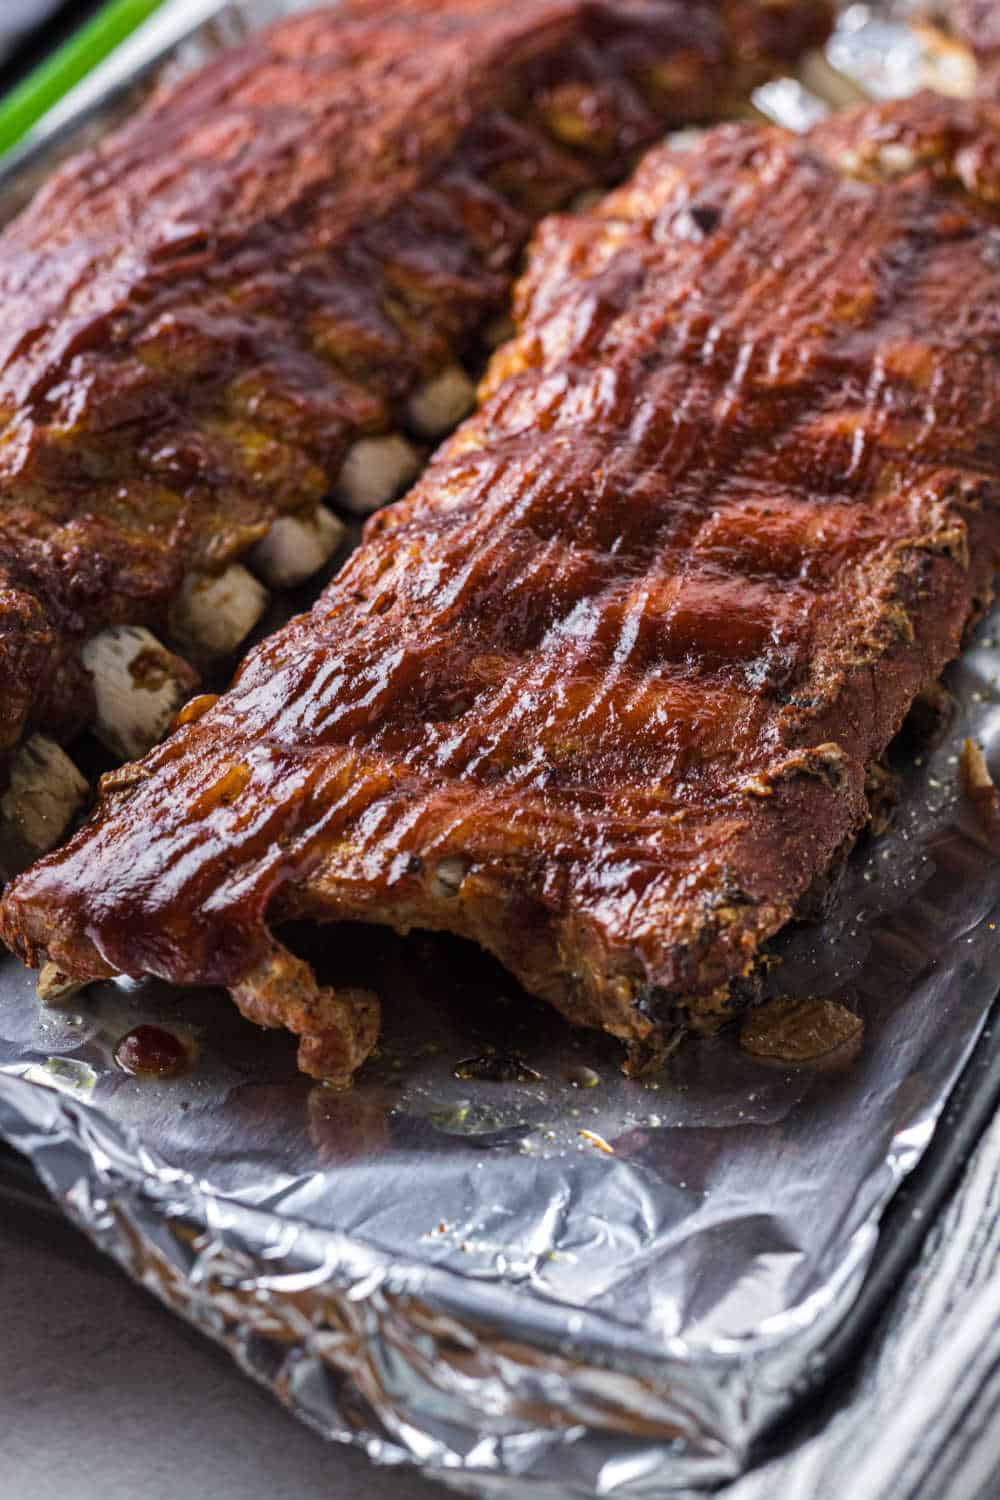 BBQ pork ribs on a baking sheet lined with aluminum foil.